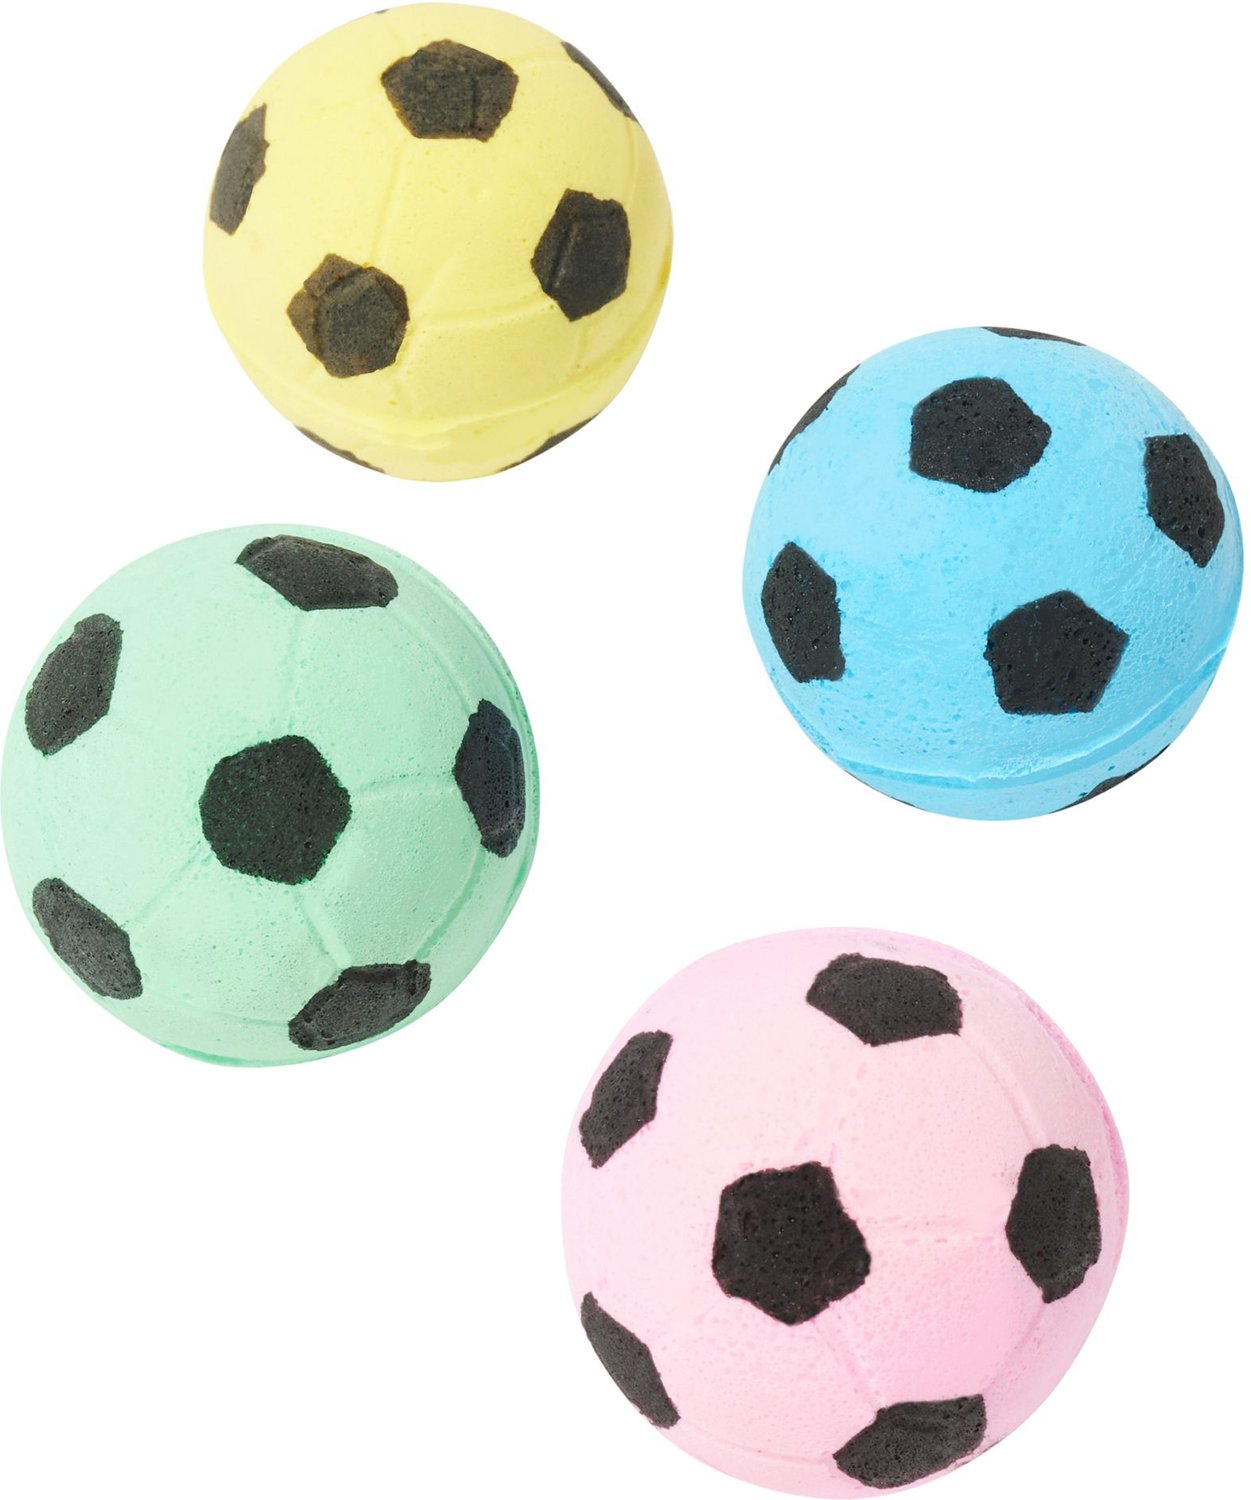 PetFavorites Foam Sponge Soccer Ball Cat Toy Interactive Cat Toys Independent Pet Kitten Cat Exrecise Toy Balls for Real Cats Kittens Bouncy and Noise Free. Soft 